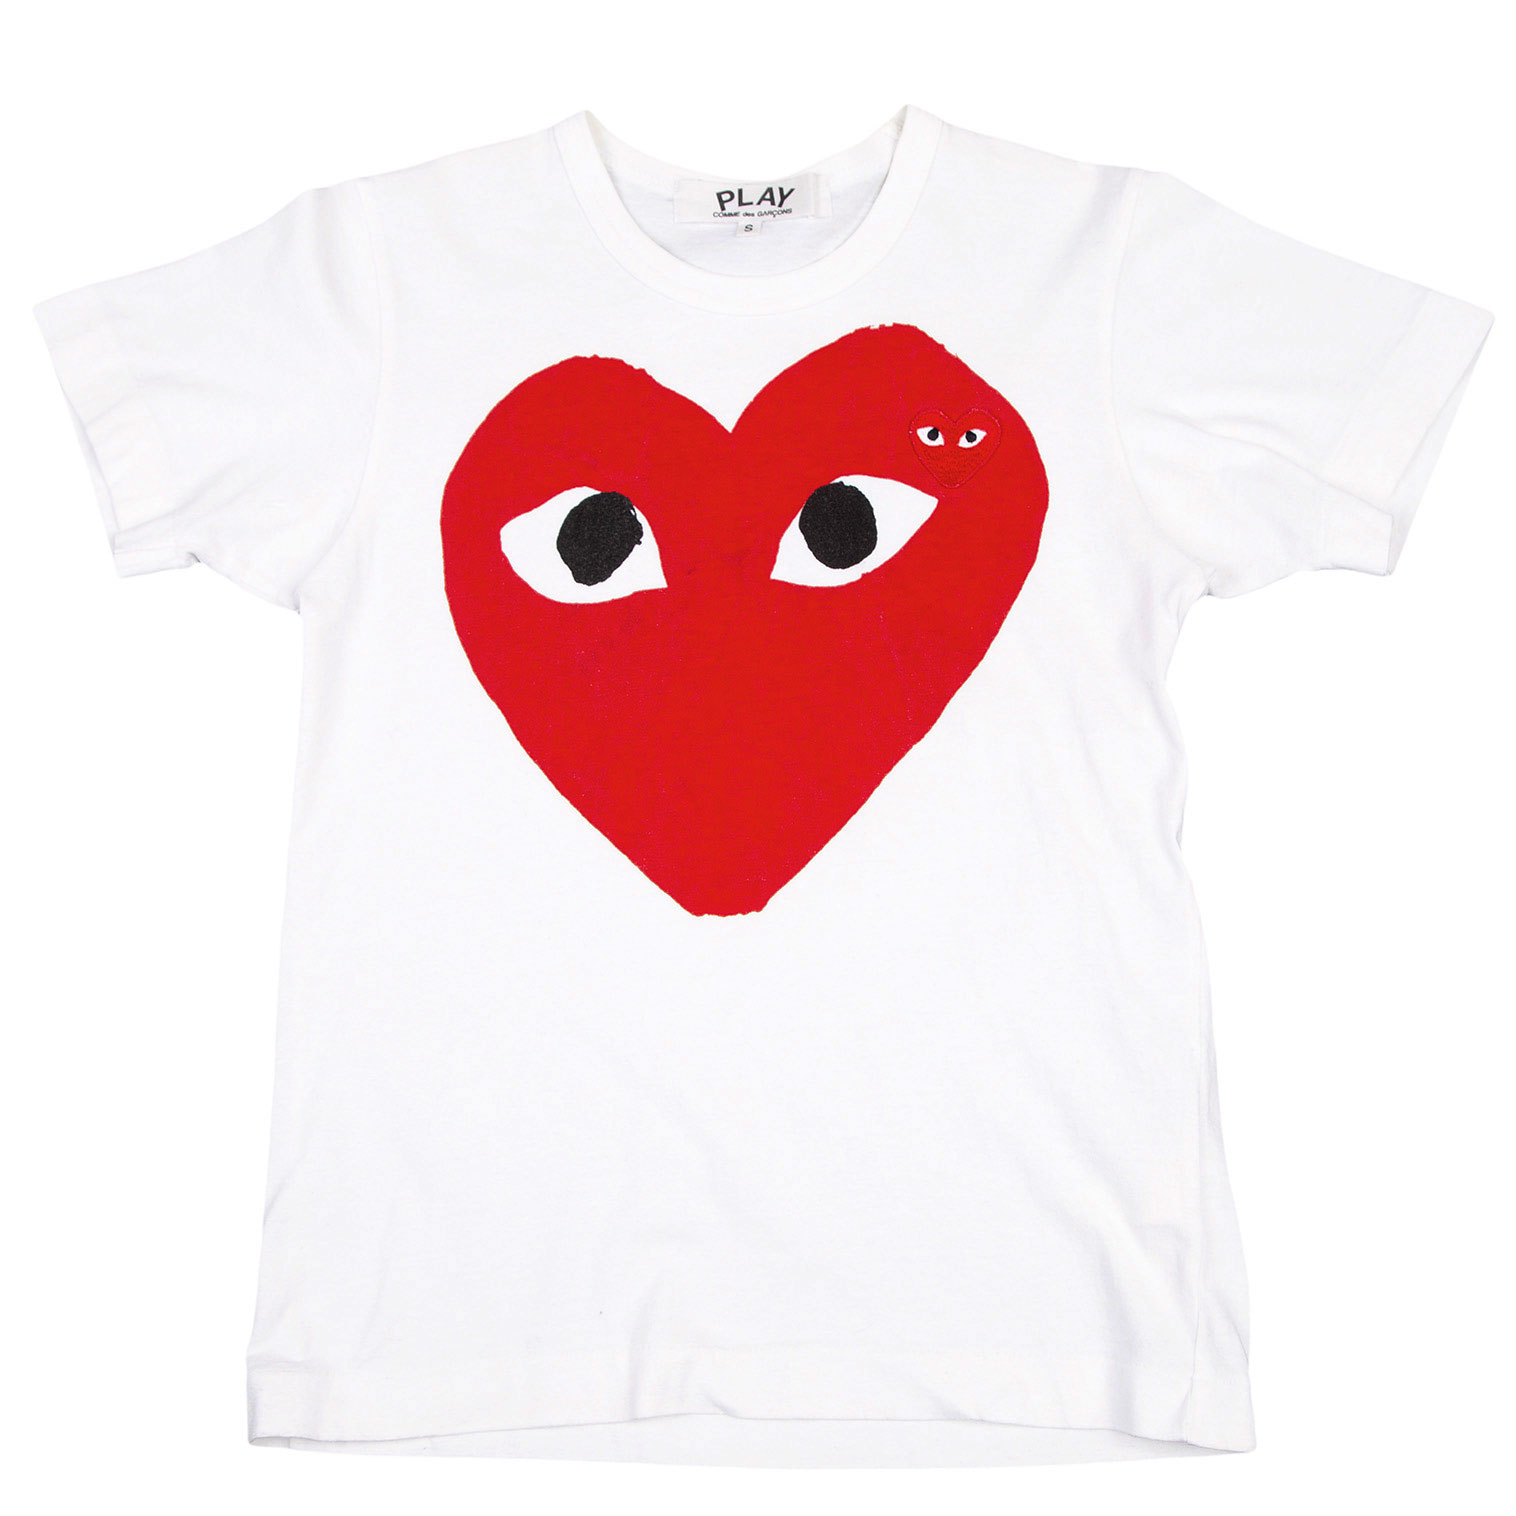 PLAY COMME des GARÇONS フロント ハートプリント Tシャツ